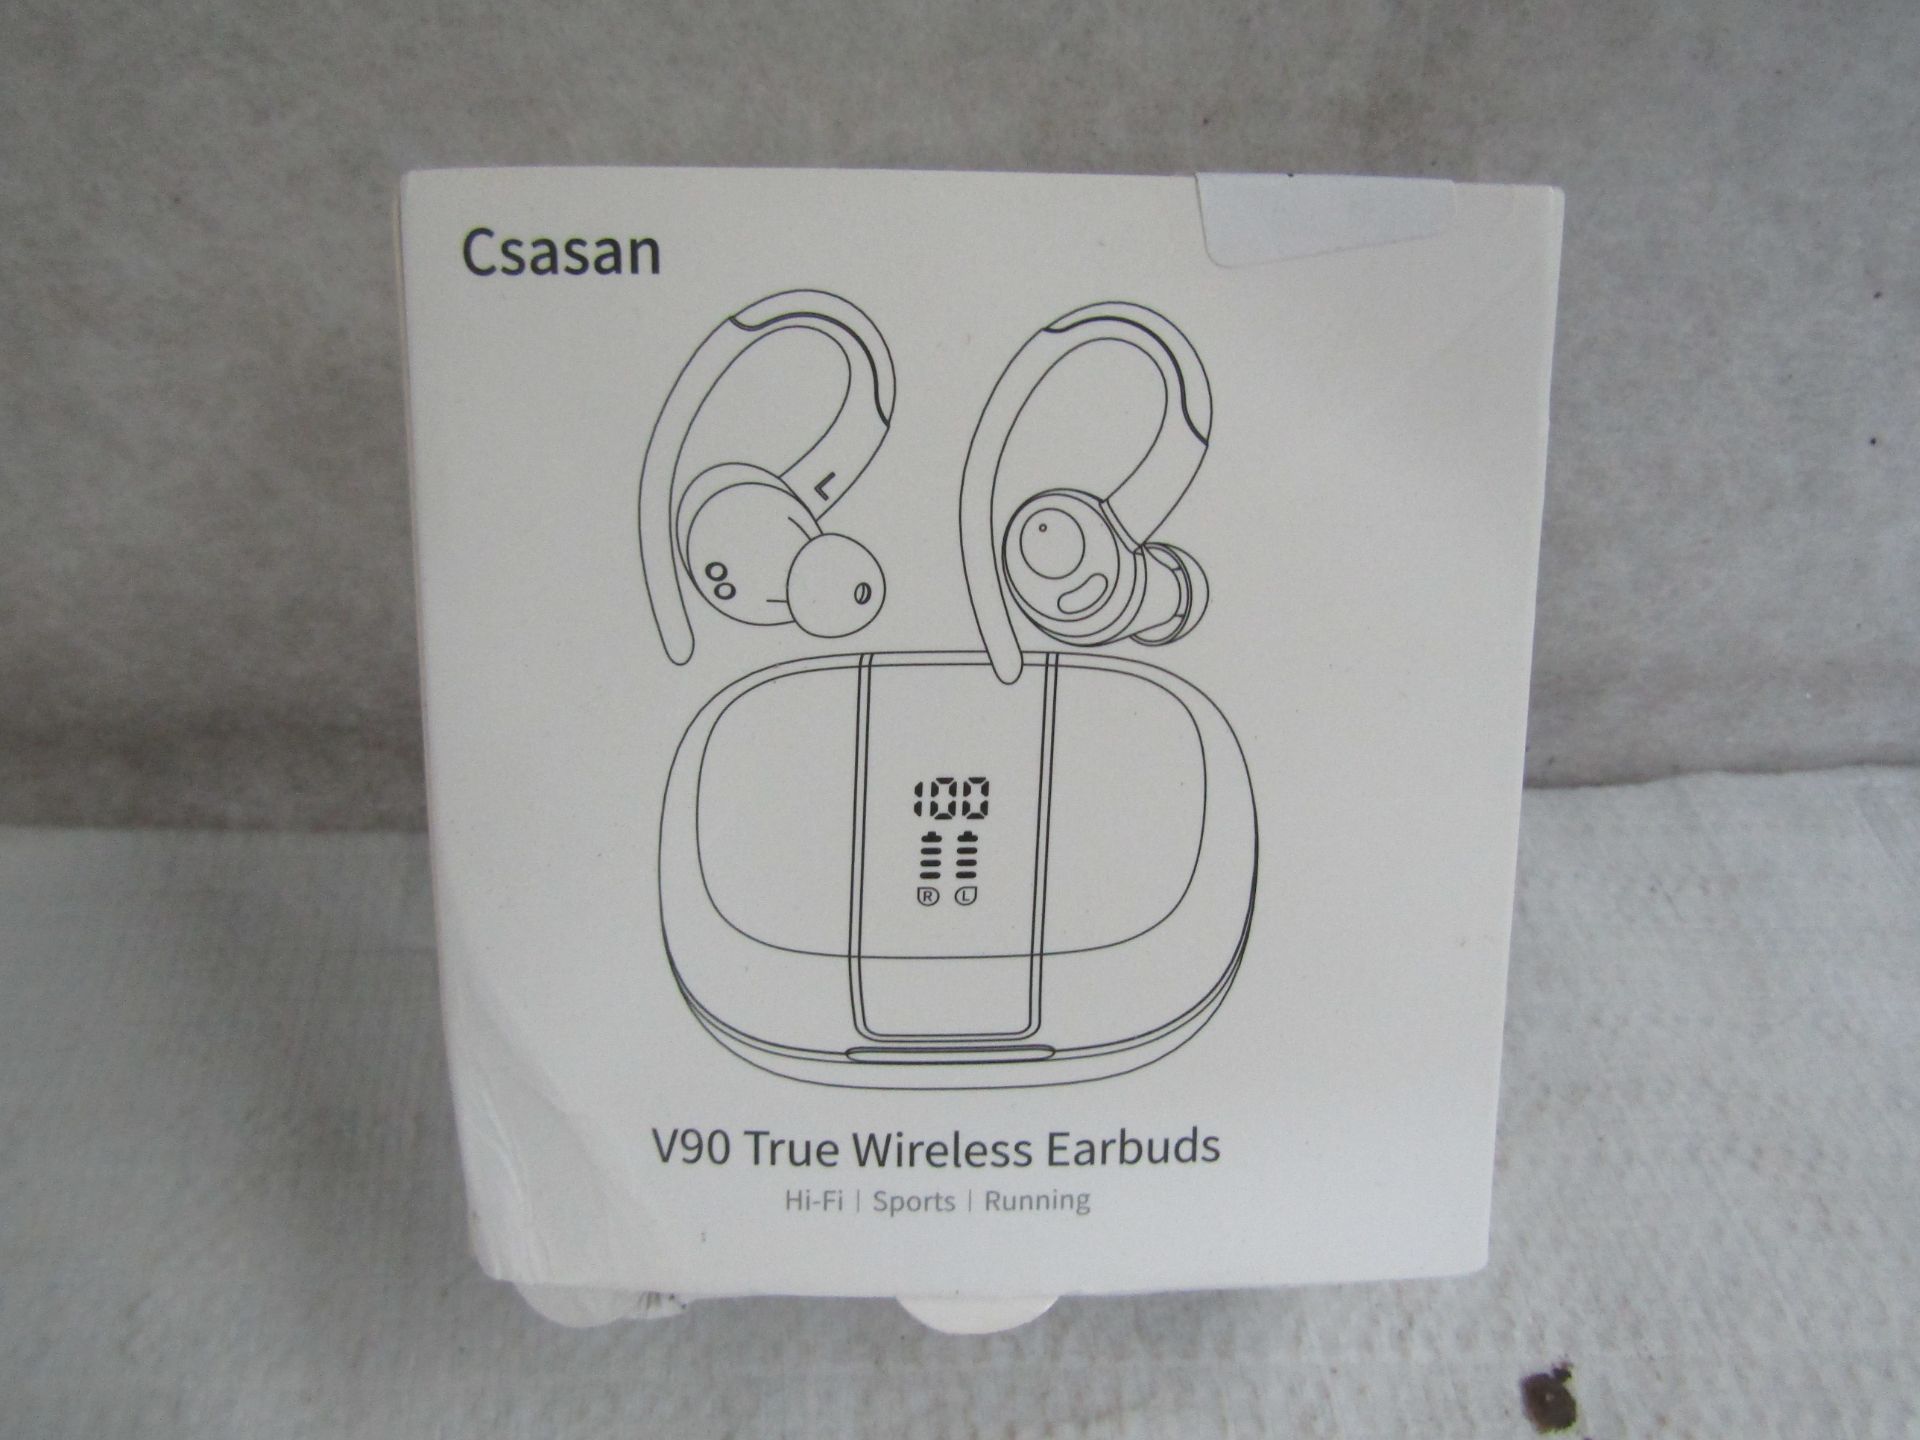 Csasan V90 True Wireless Earbuds - Unchecked & Boxed.